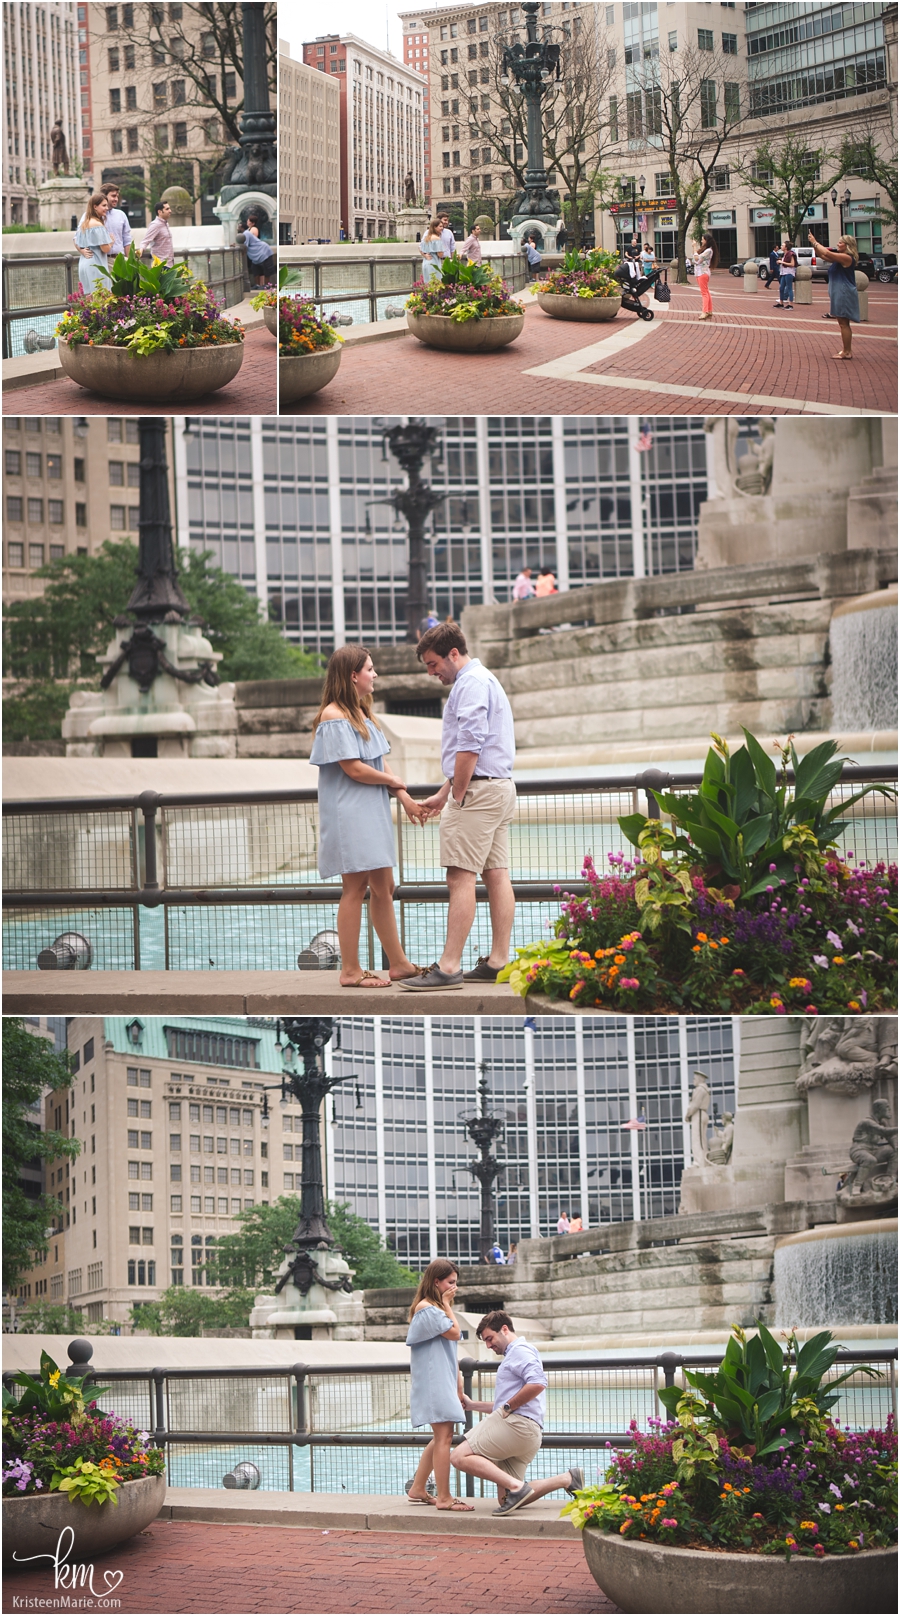 will you marry me?! Hire a proposal photographer. Your fiance will love it!